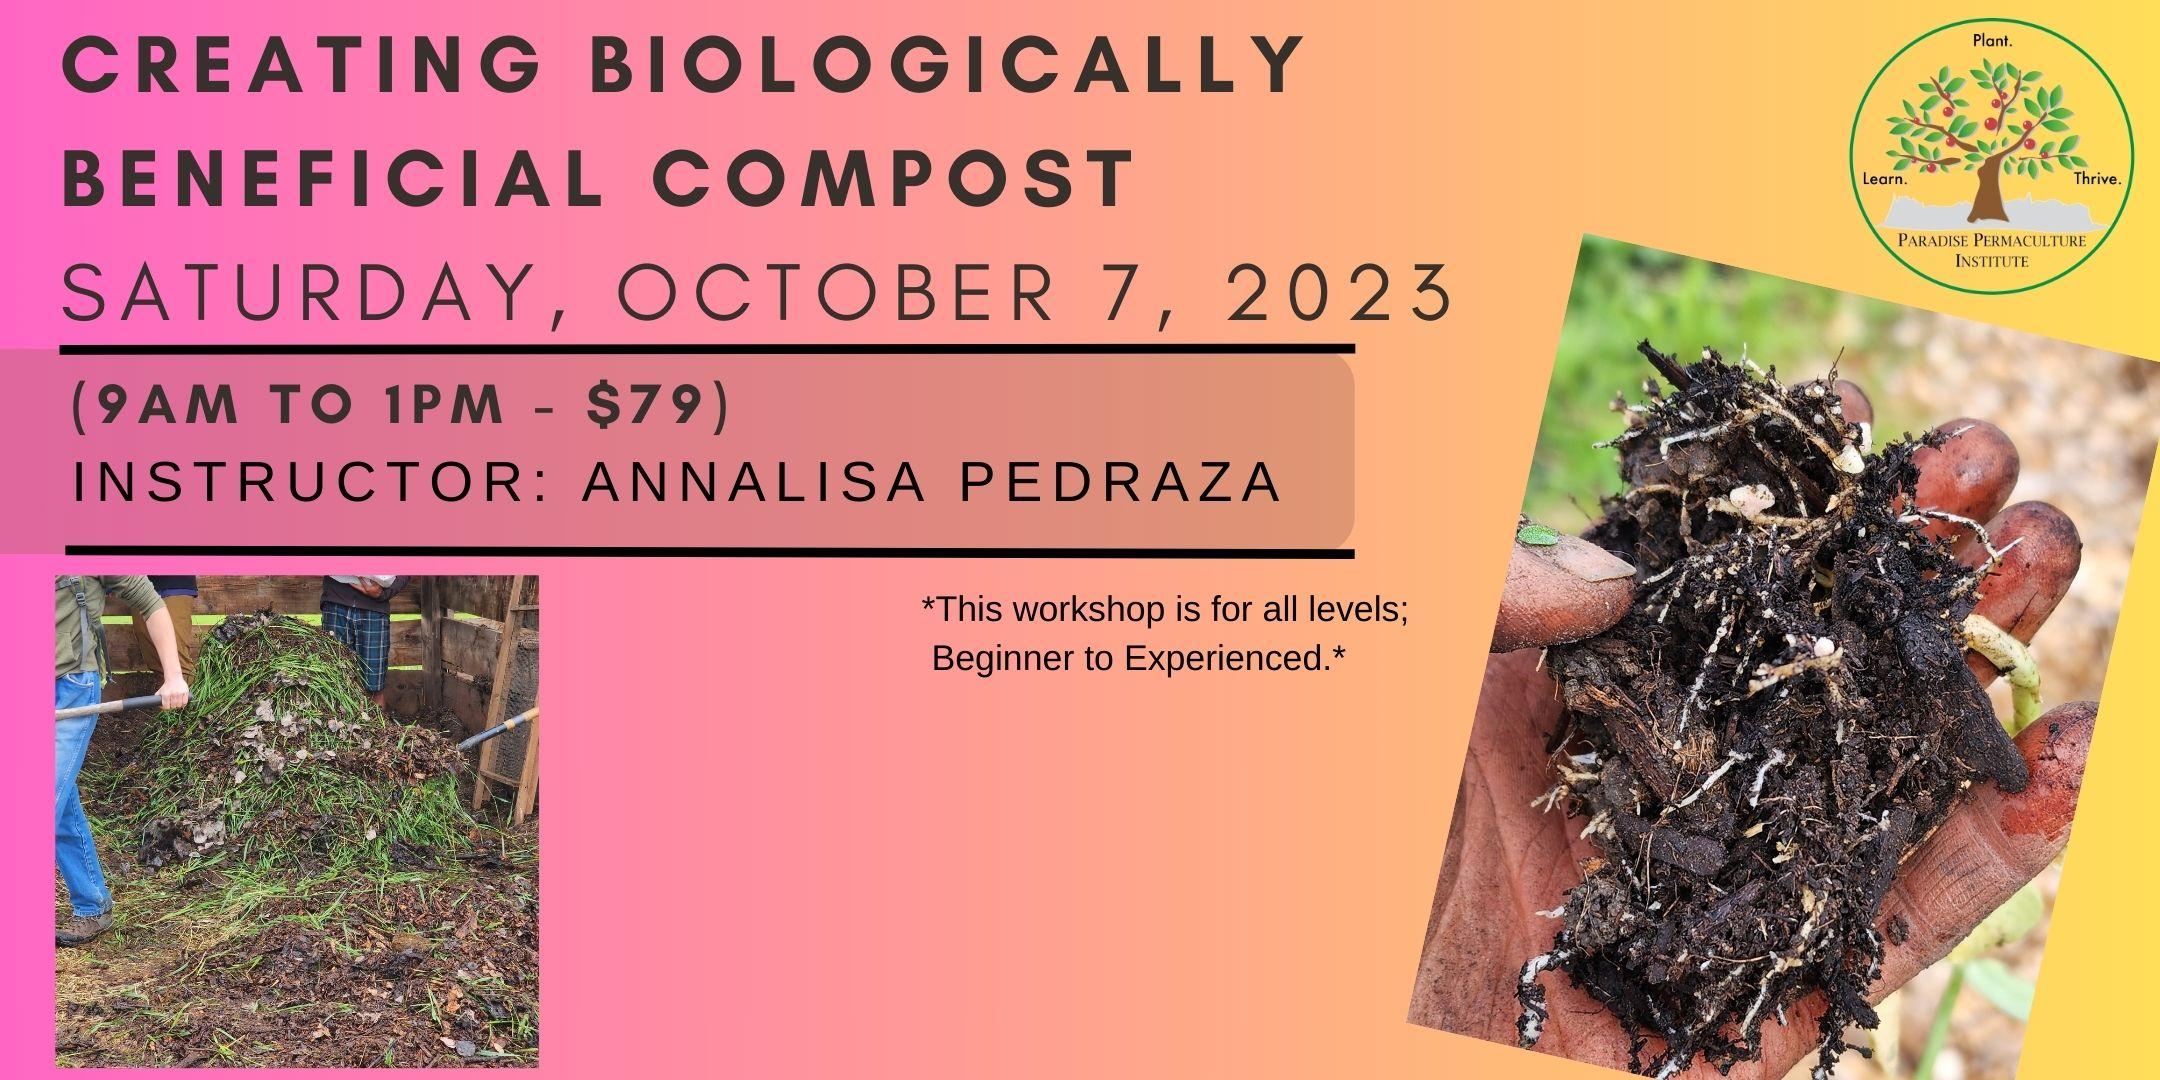 MAKING COMPOST - Creating Biologically Beneficial Compost